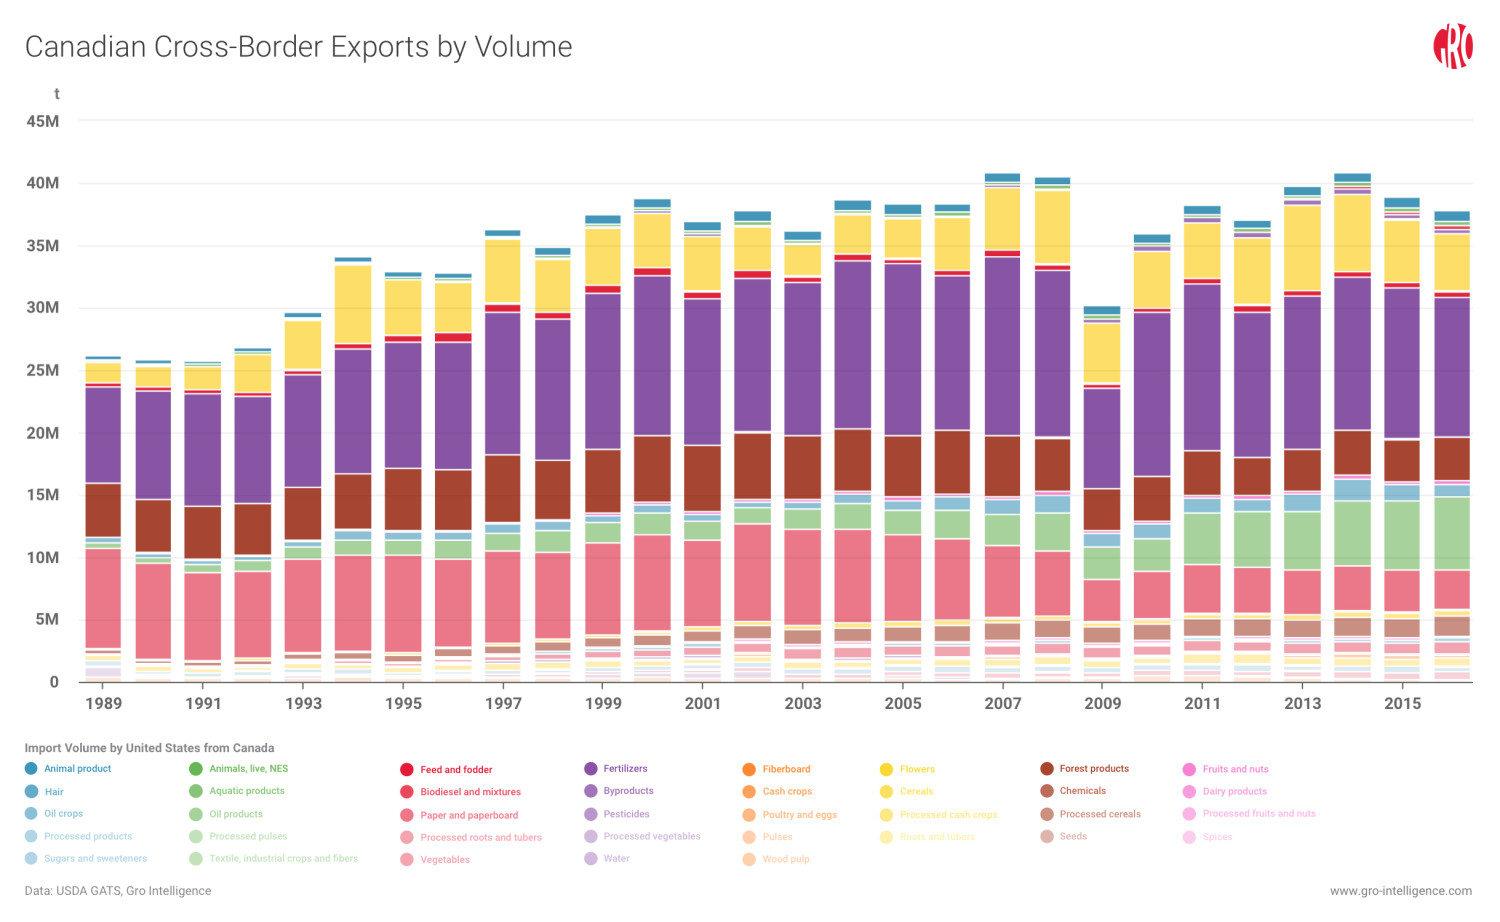 Canadian Cross-Border Exports by Volume